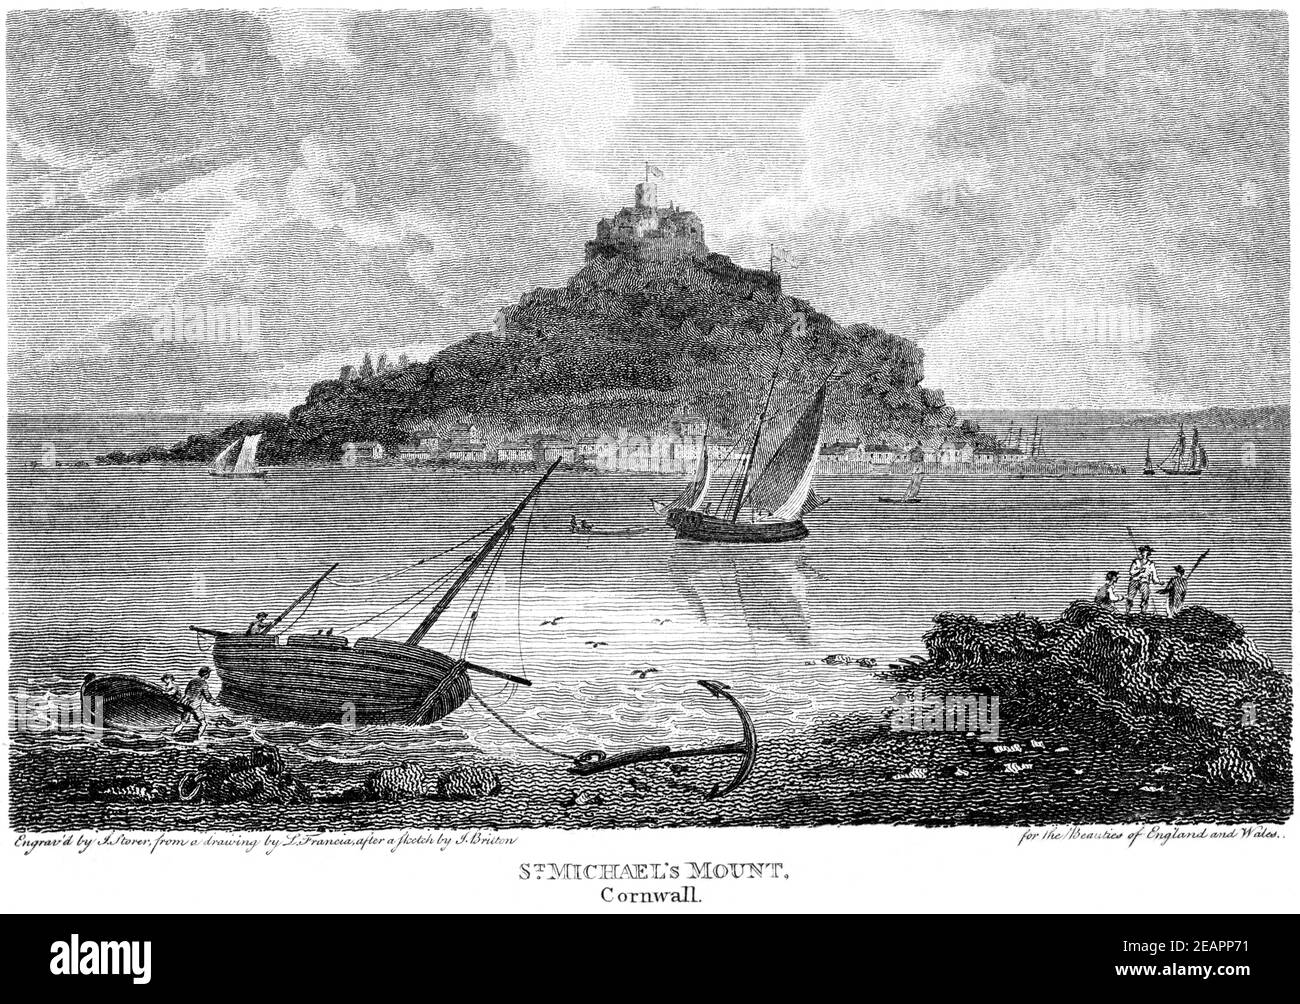 An engraving of St Michael's Mount, Cornwall scanned at high resolution from a book printed in 1812. Believed copyright free. Stock Photo